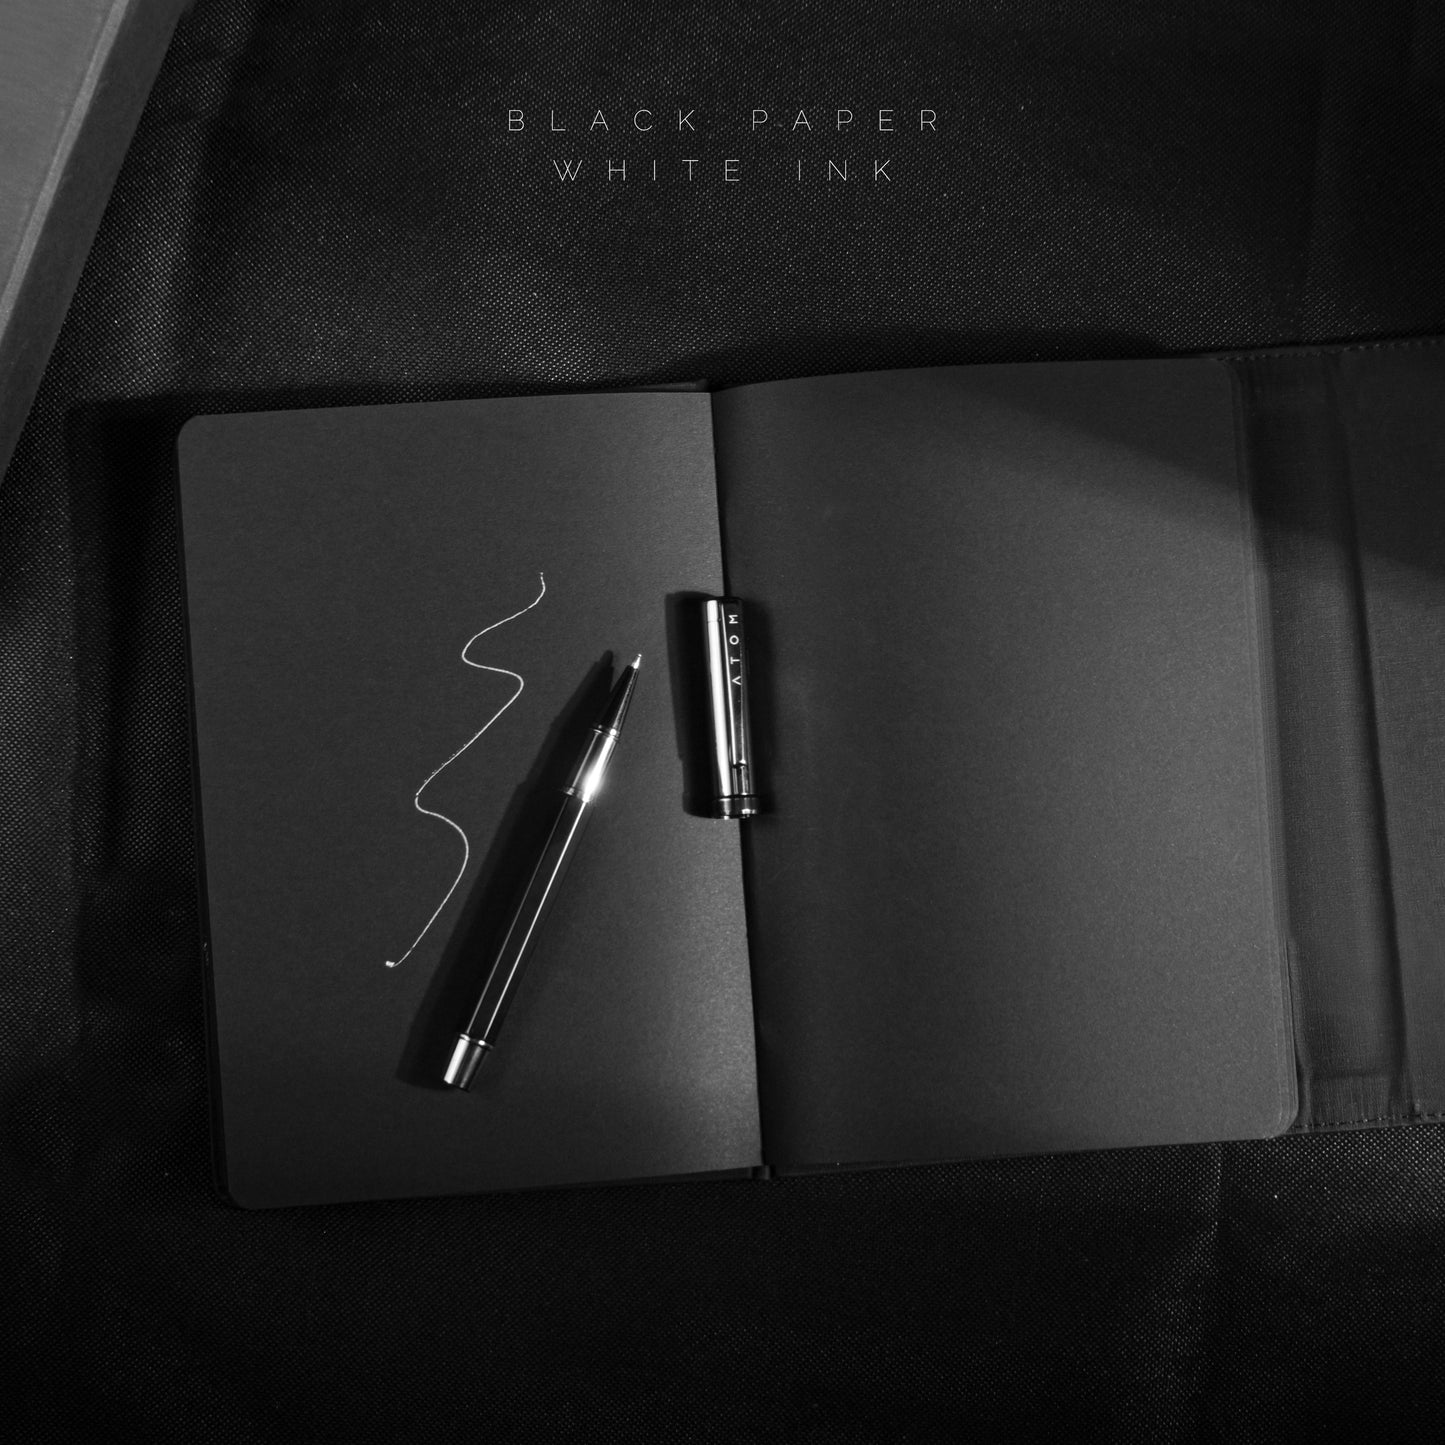 Black notebook and silver pen